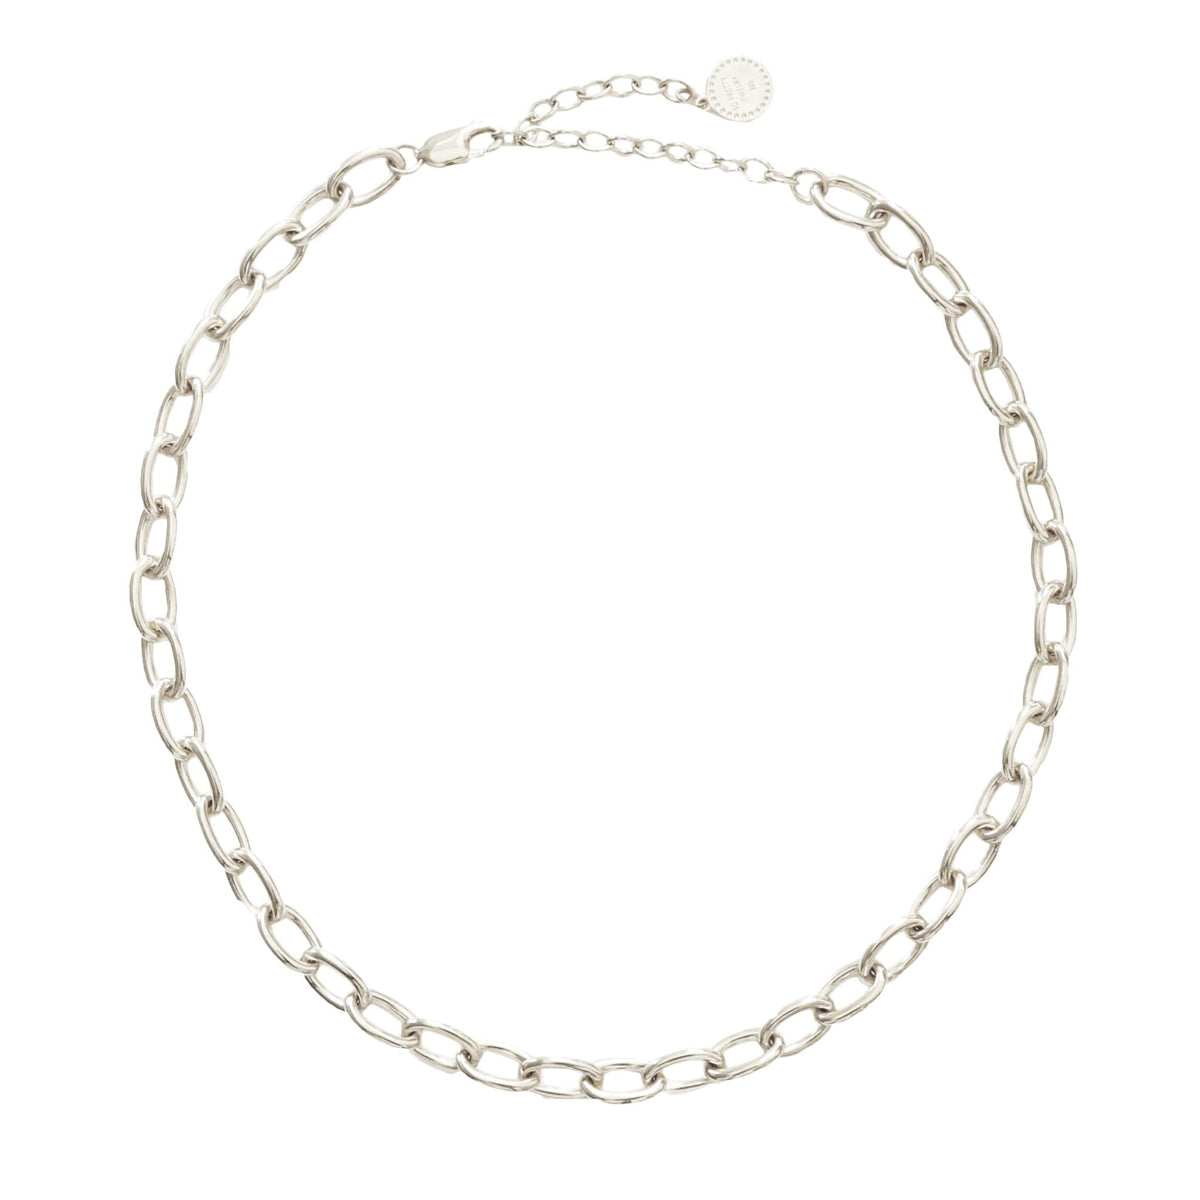 POISE HEAVY OVAL LINK NECKLACE - SILVER 15-18” - SO PRETTY CARA COTTER